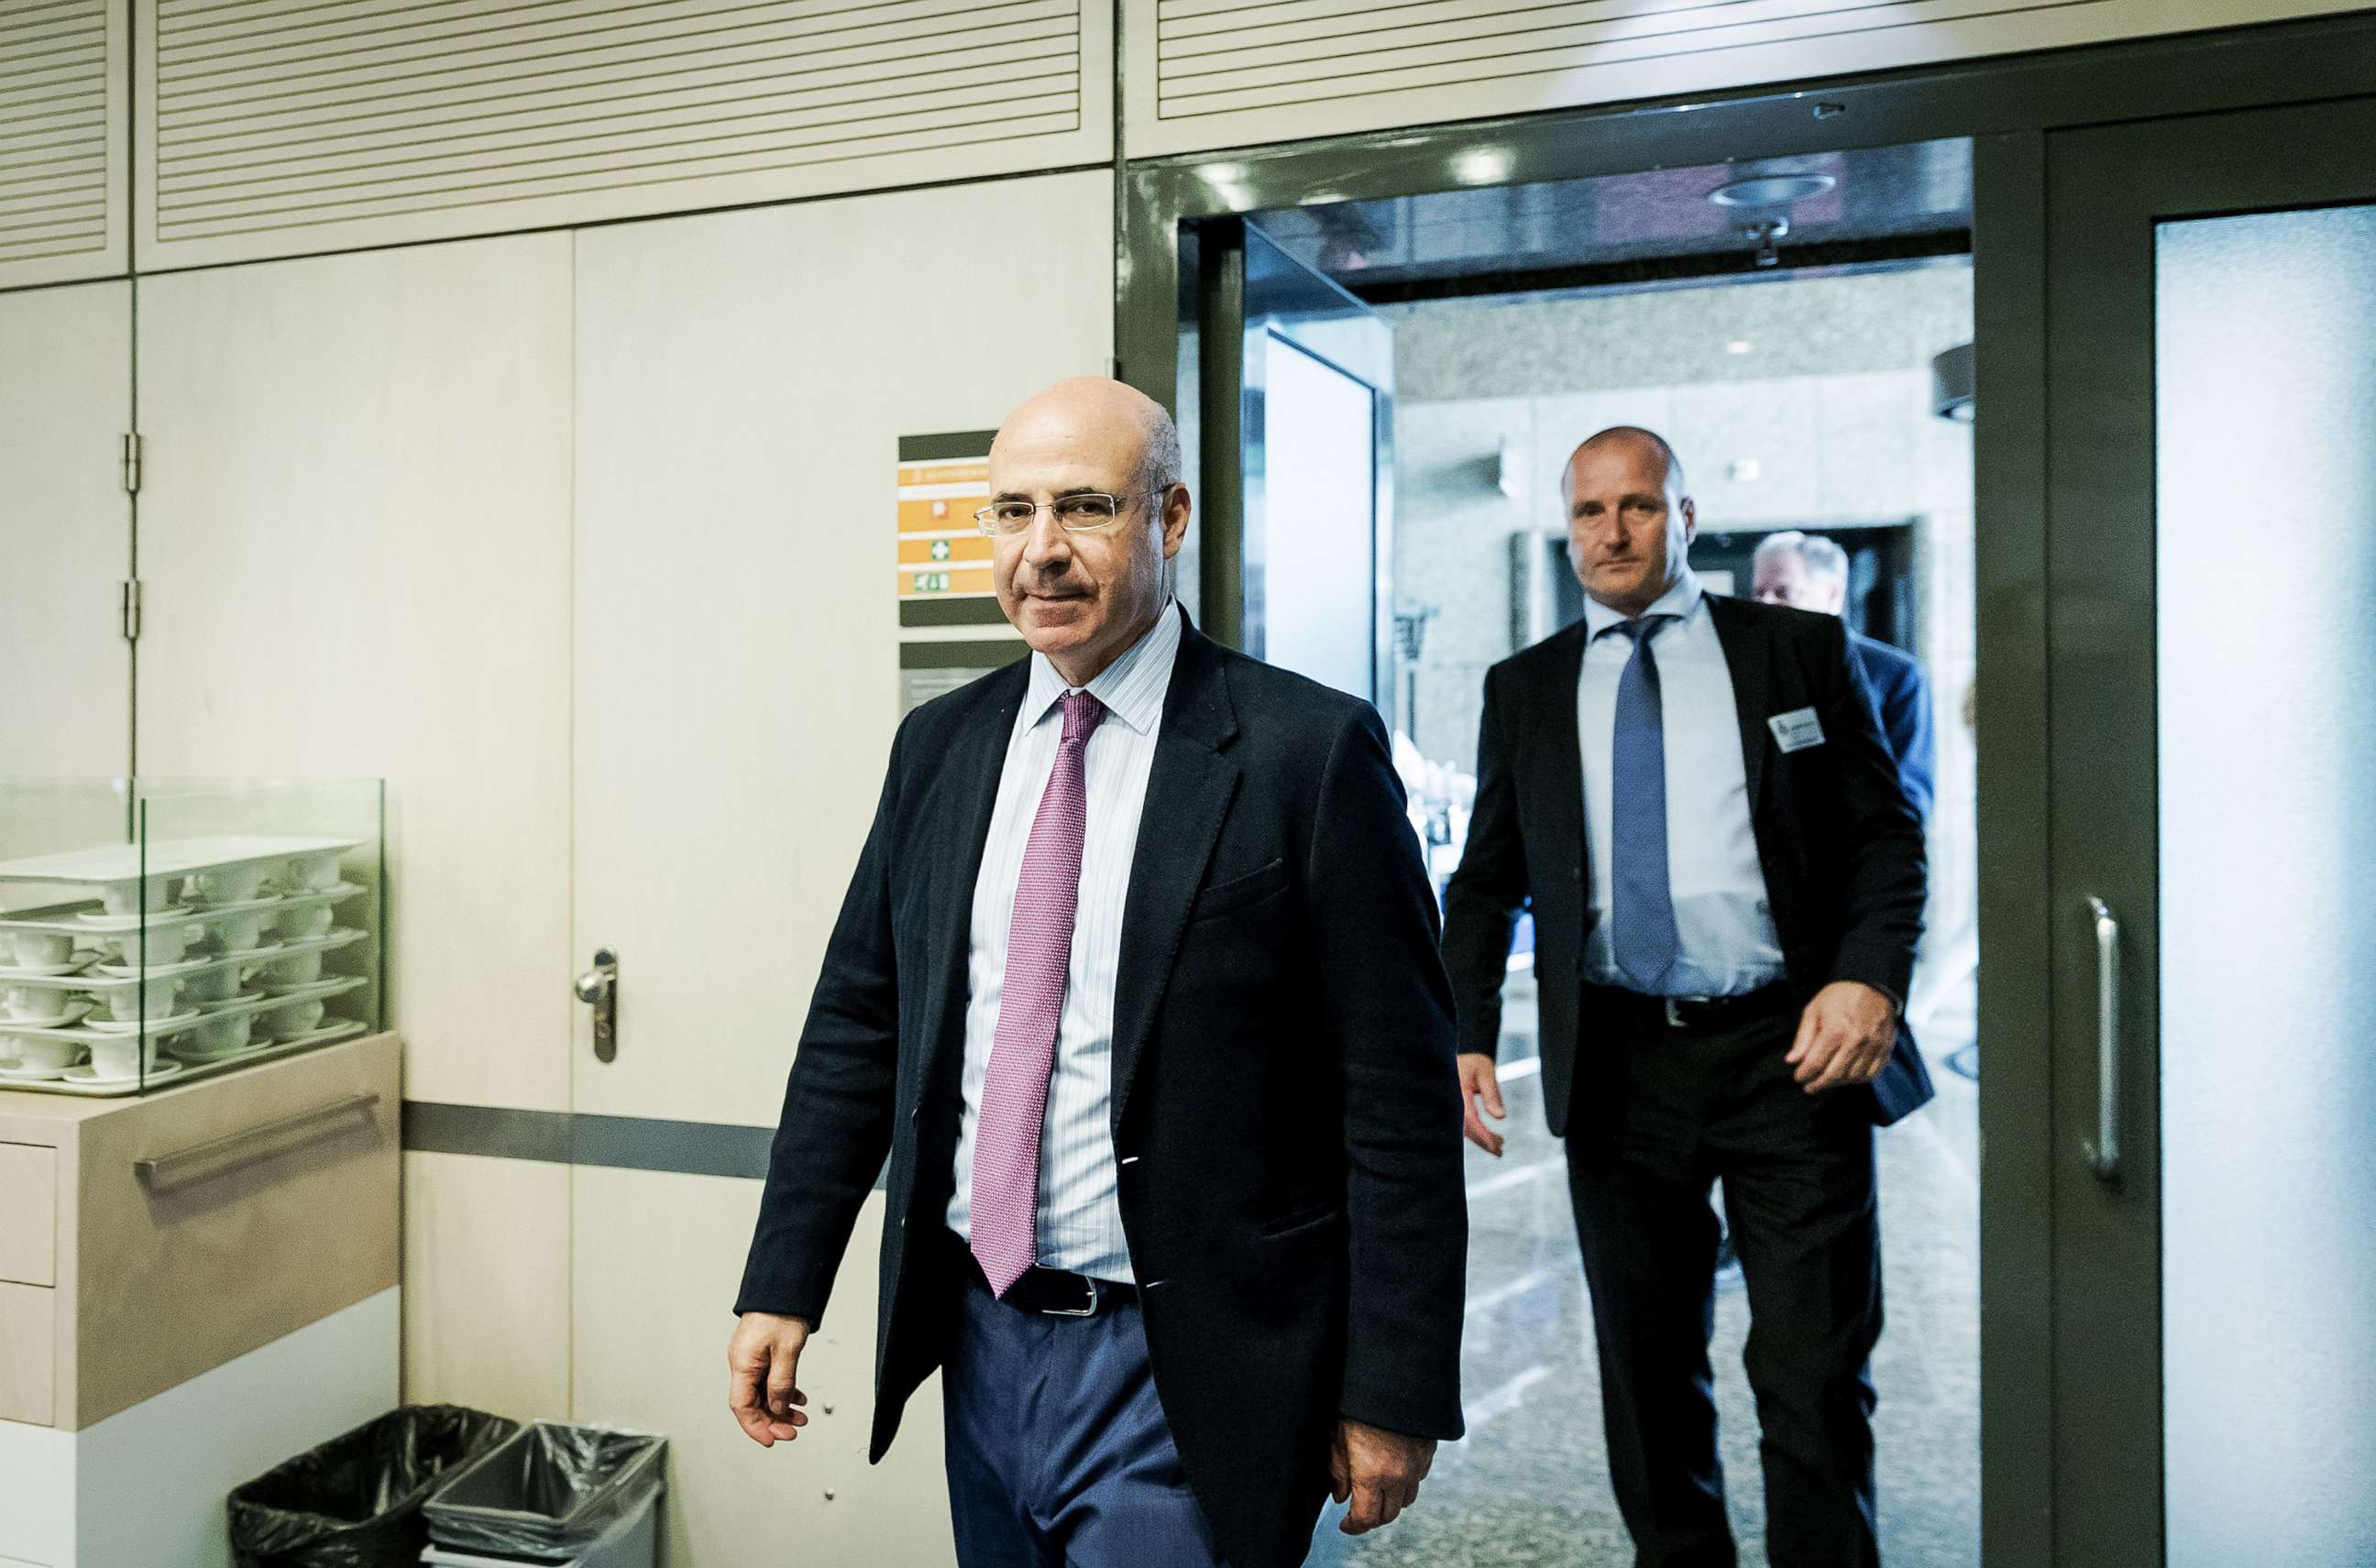 PHOTO: CEO of Hermitage Capital Management Bill Browder walks in the House of Representatives in The Hague on May 23, 2018, where he is to speak on the Magnitsky Act.